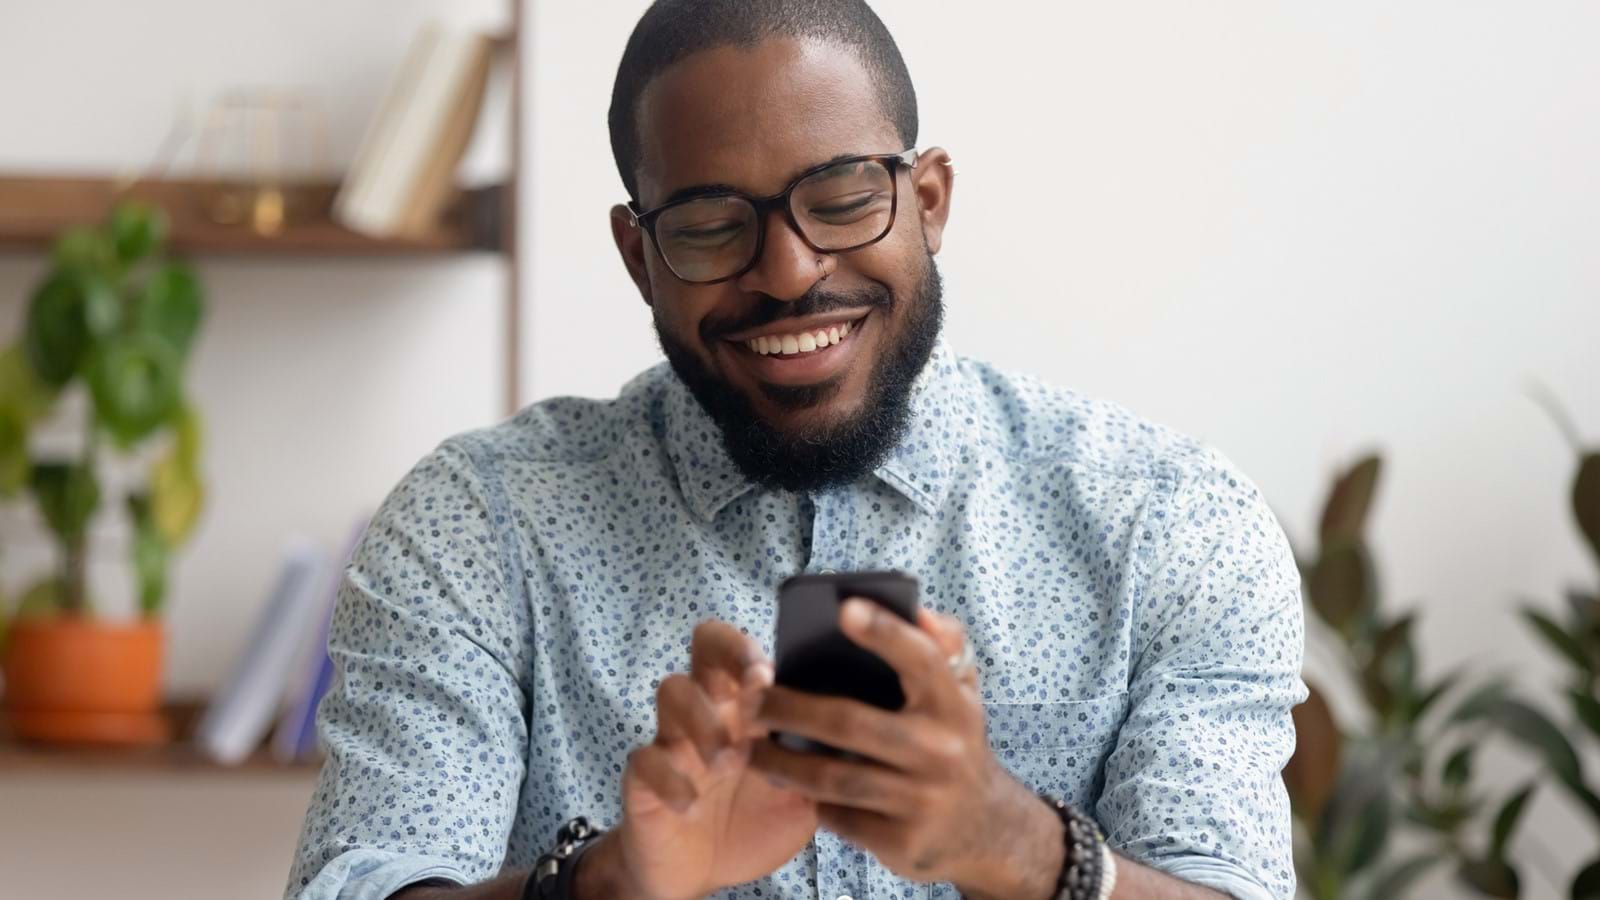 Employee using his mobile to reach his company's digital workplace, smiling and having a good experience